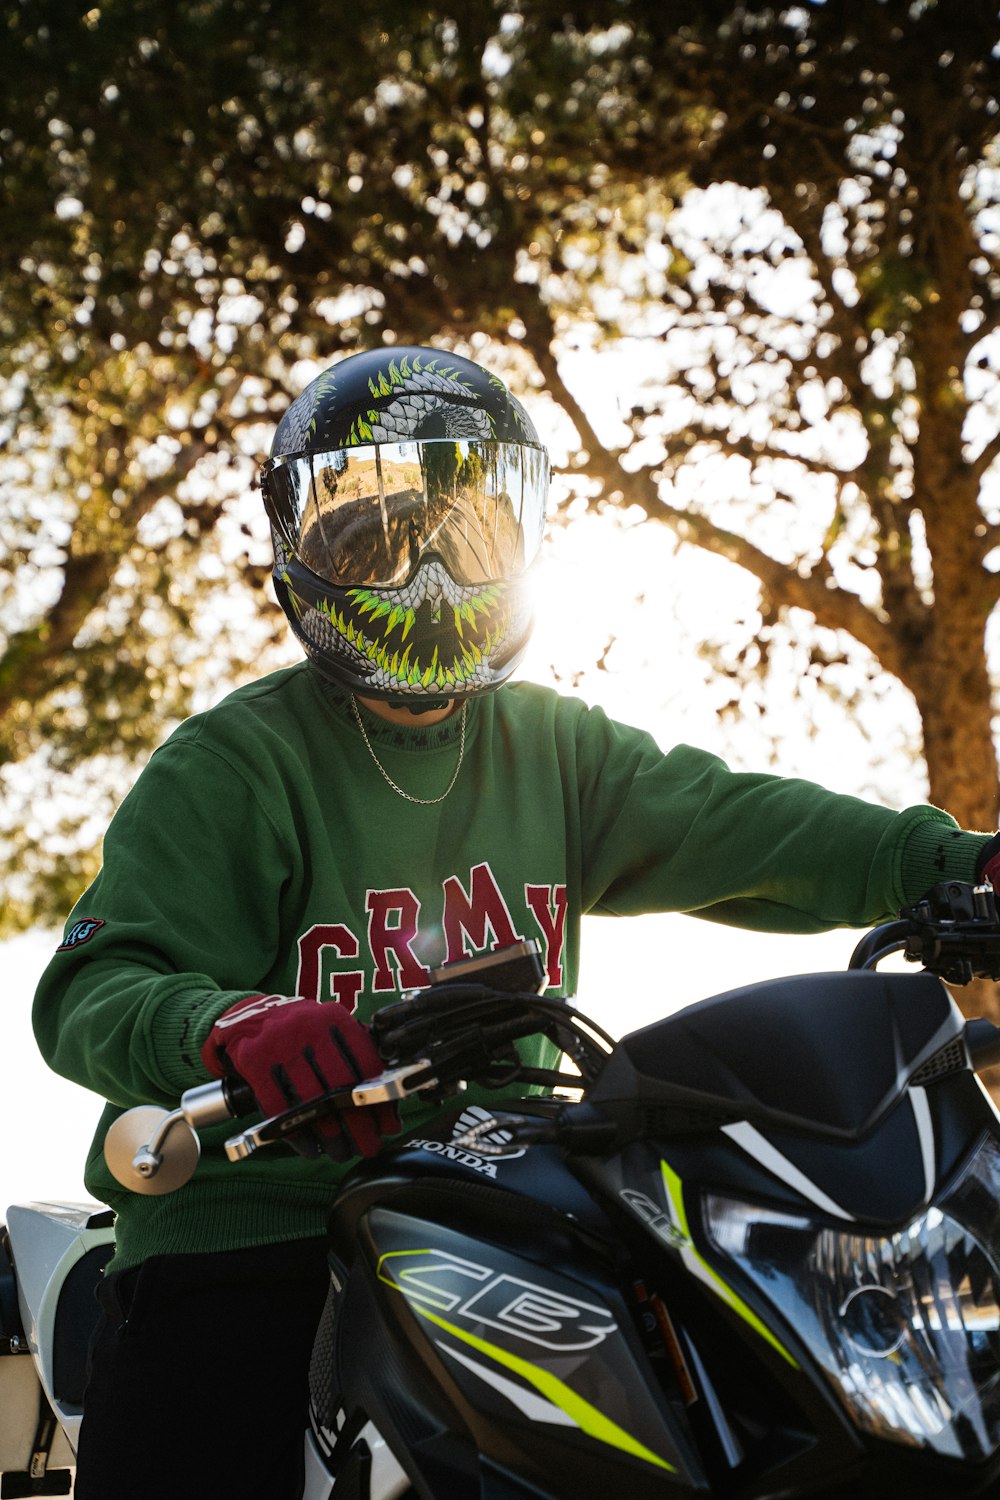 a man in a green shirt is sitting on a motorcycle